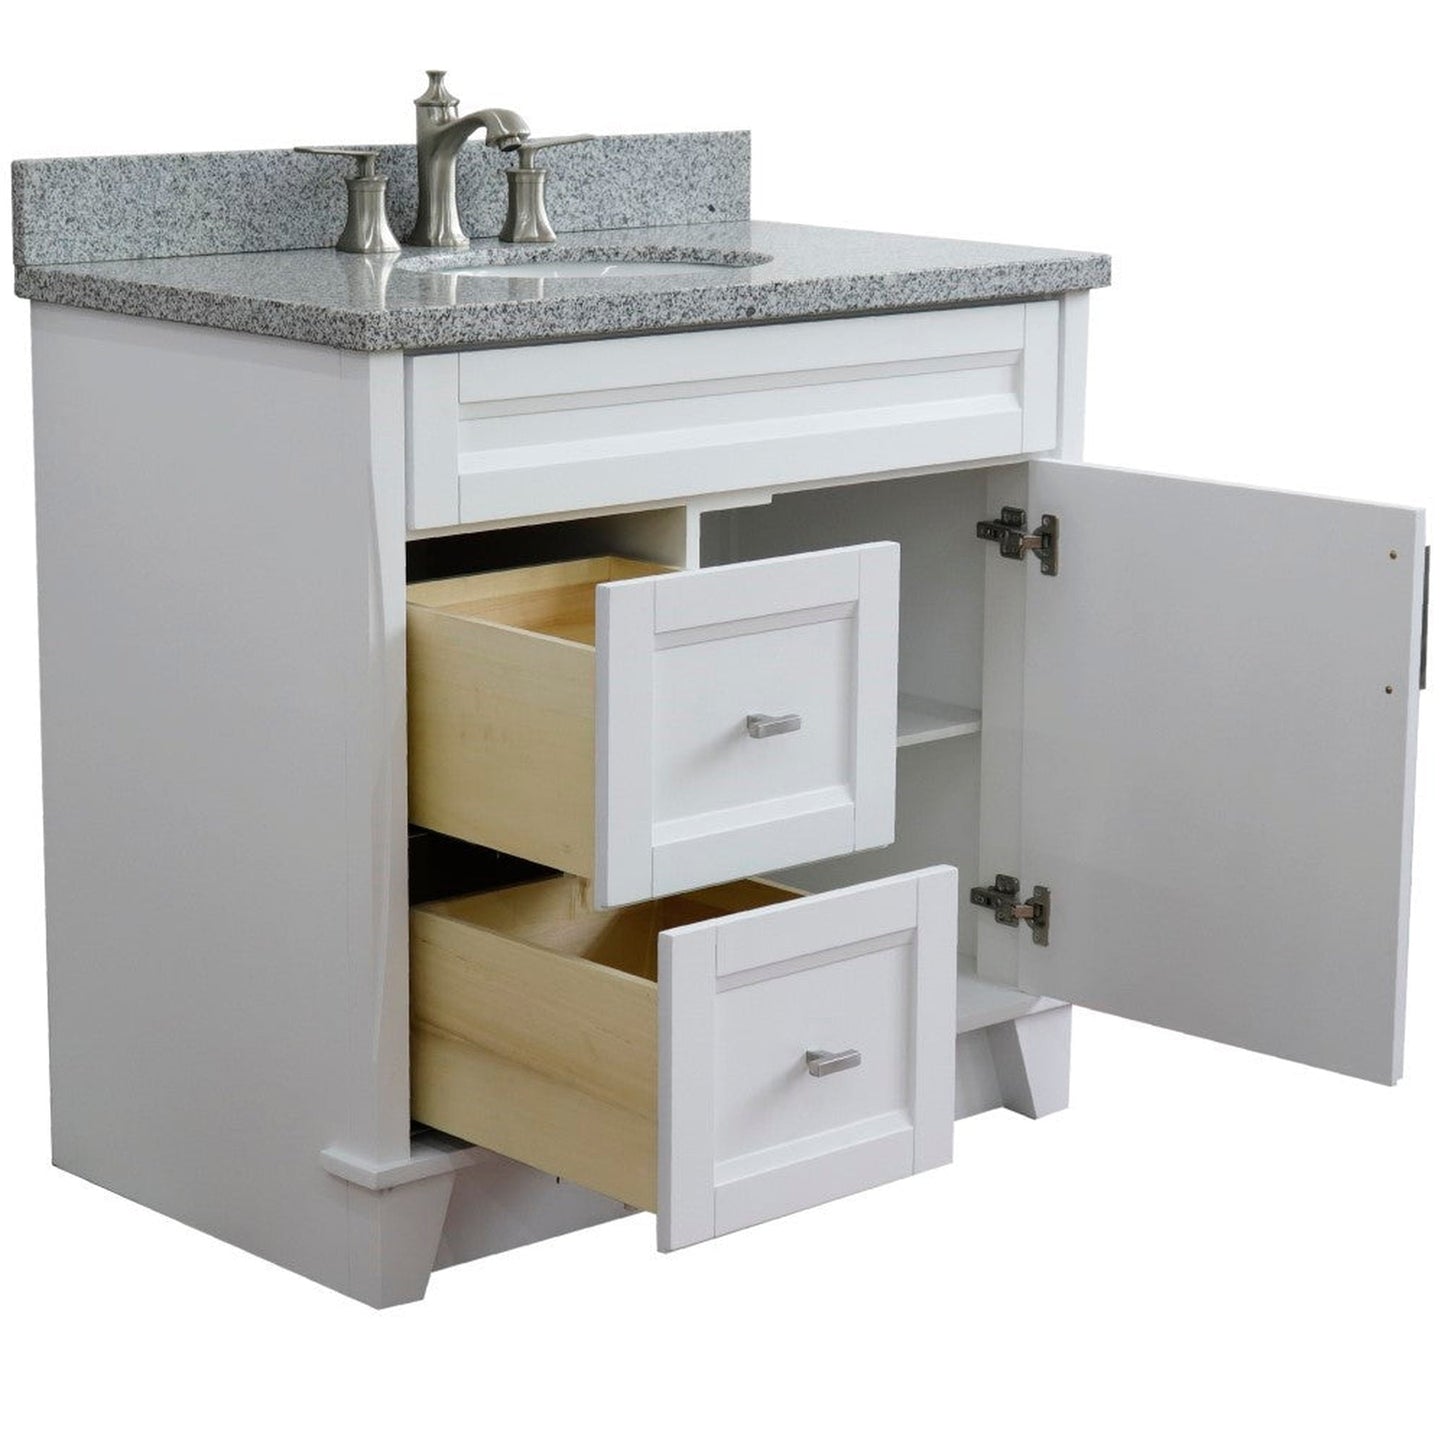 Bellaterra Home Terni 37" 1-Door 2-Drawer White Freestanding Vanity Set With Ceramic Center Undermount Oval Sink and Gray Granite Top, and Right Door Base